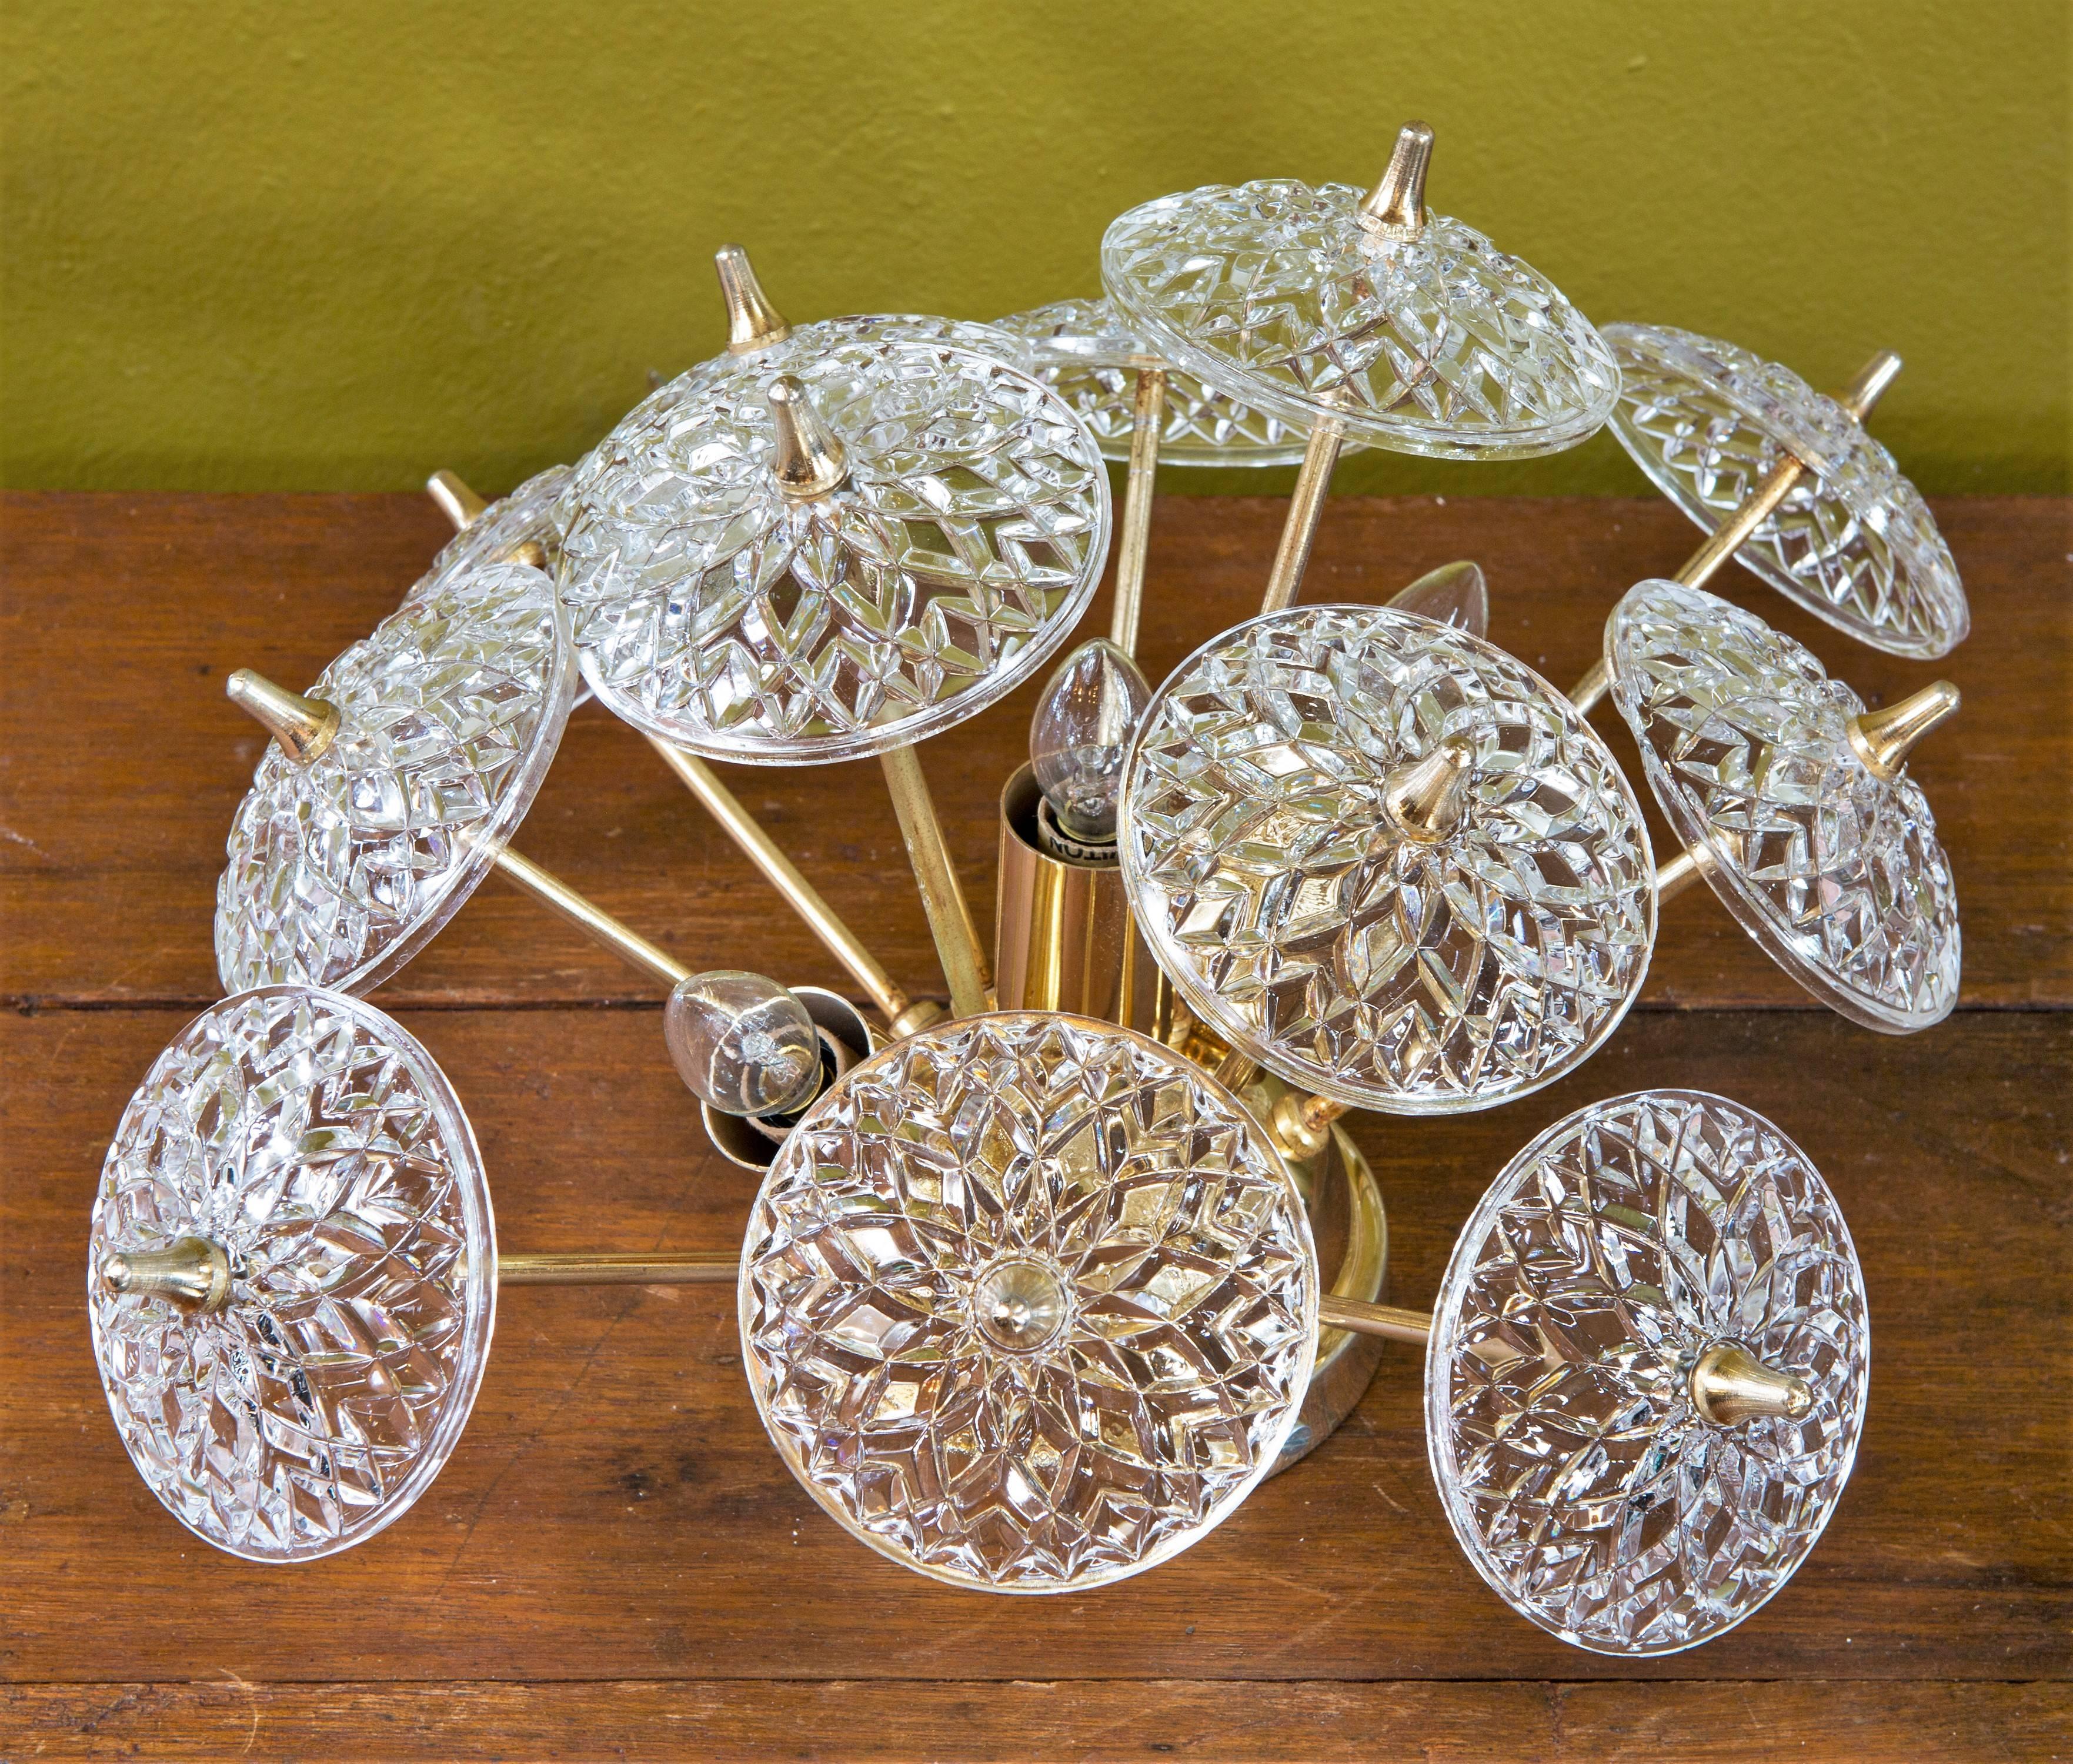 Vintage 1960s Belgian wall or flush mount light in brass with 12 Val Saint Lambert crystal discs. Newly wired with all UL listed parts and three candelabra sockets, per fixture. Measurement listed is for one light. We also have a single, identical